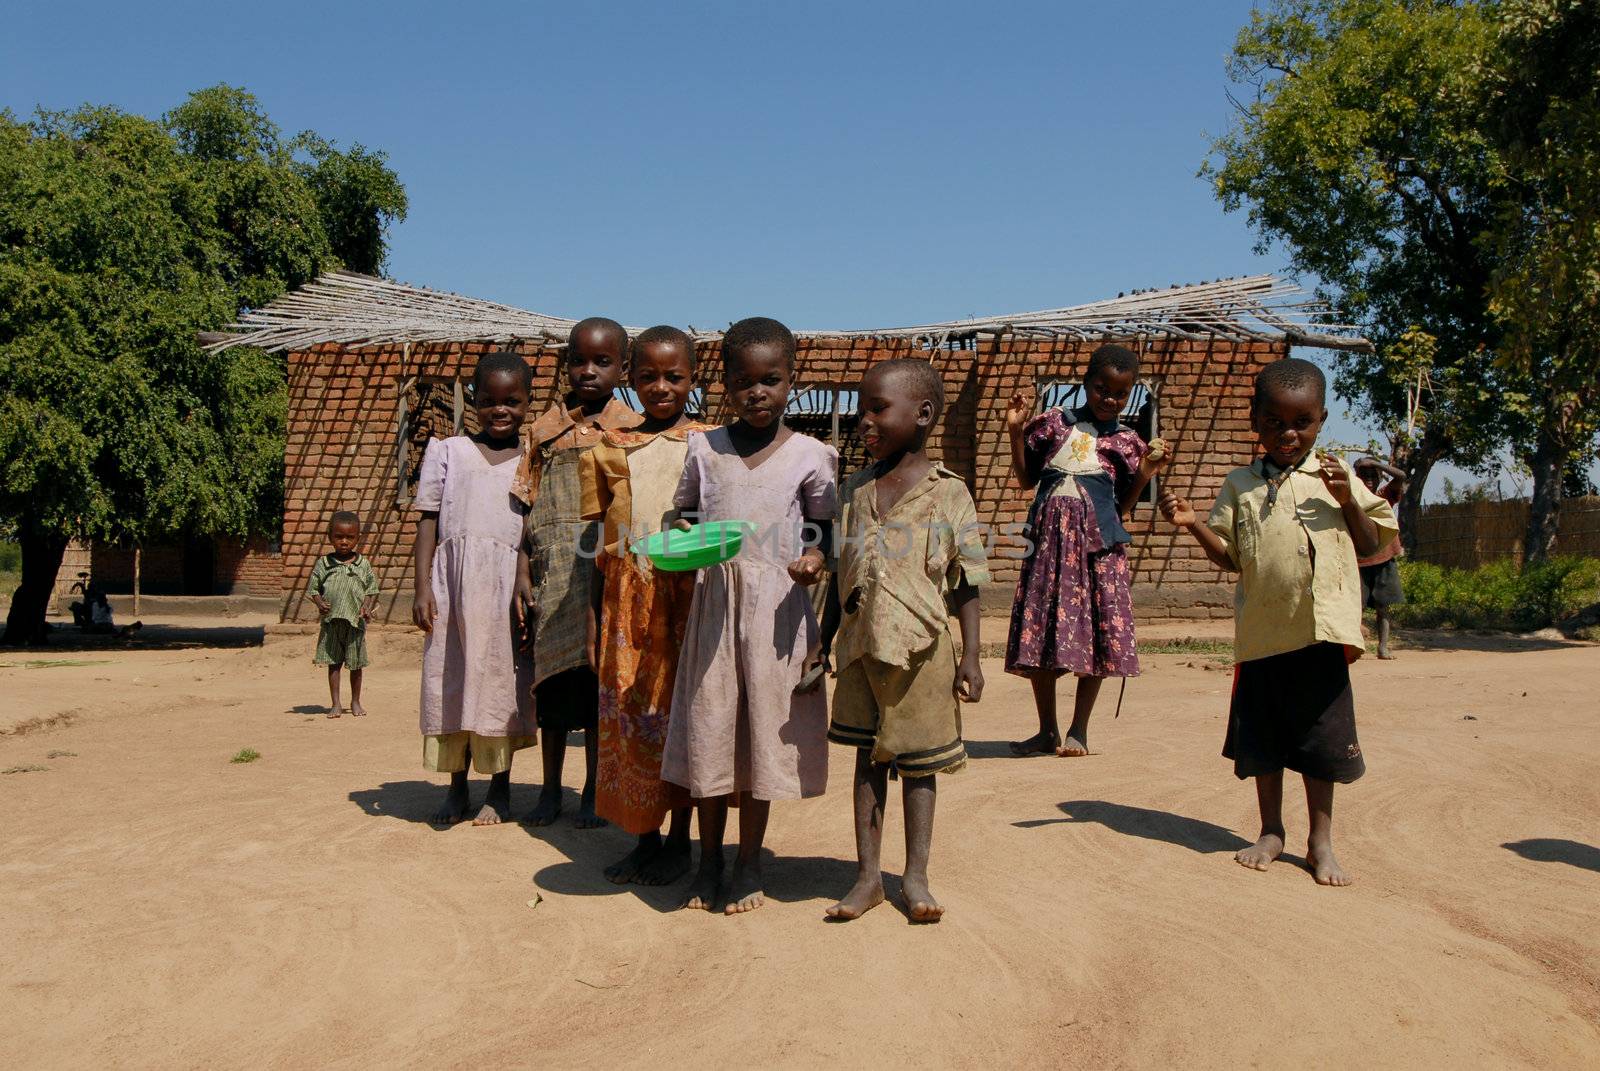 Malawi -April 22, 2007:Group of children of a village in Malawi. Malawi is one of the poorest countries on the planet.